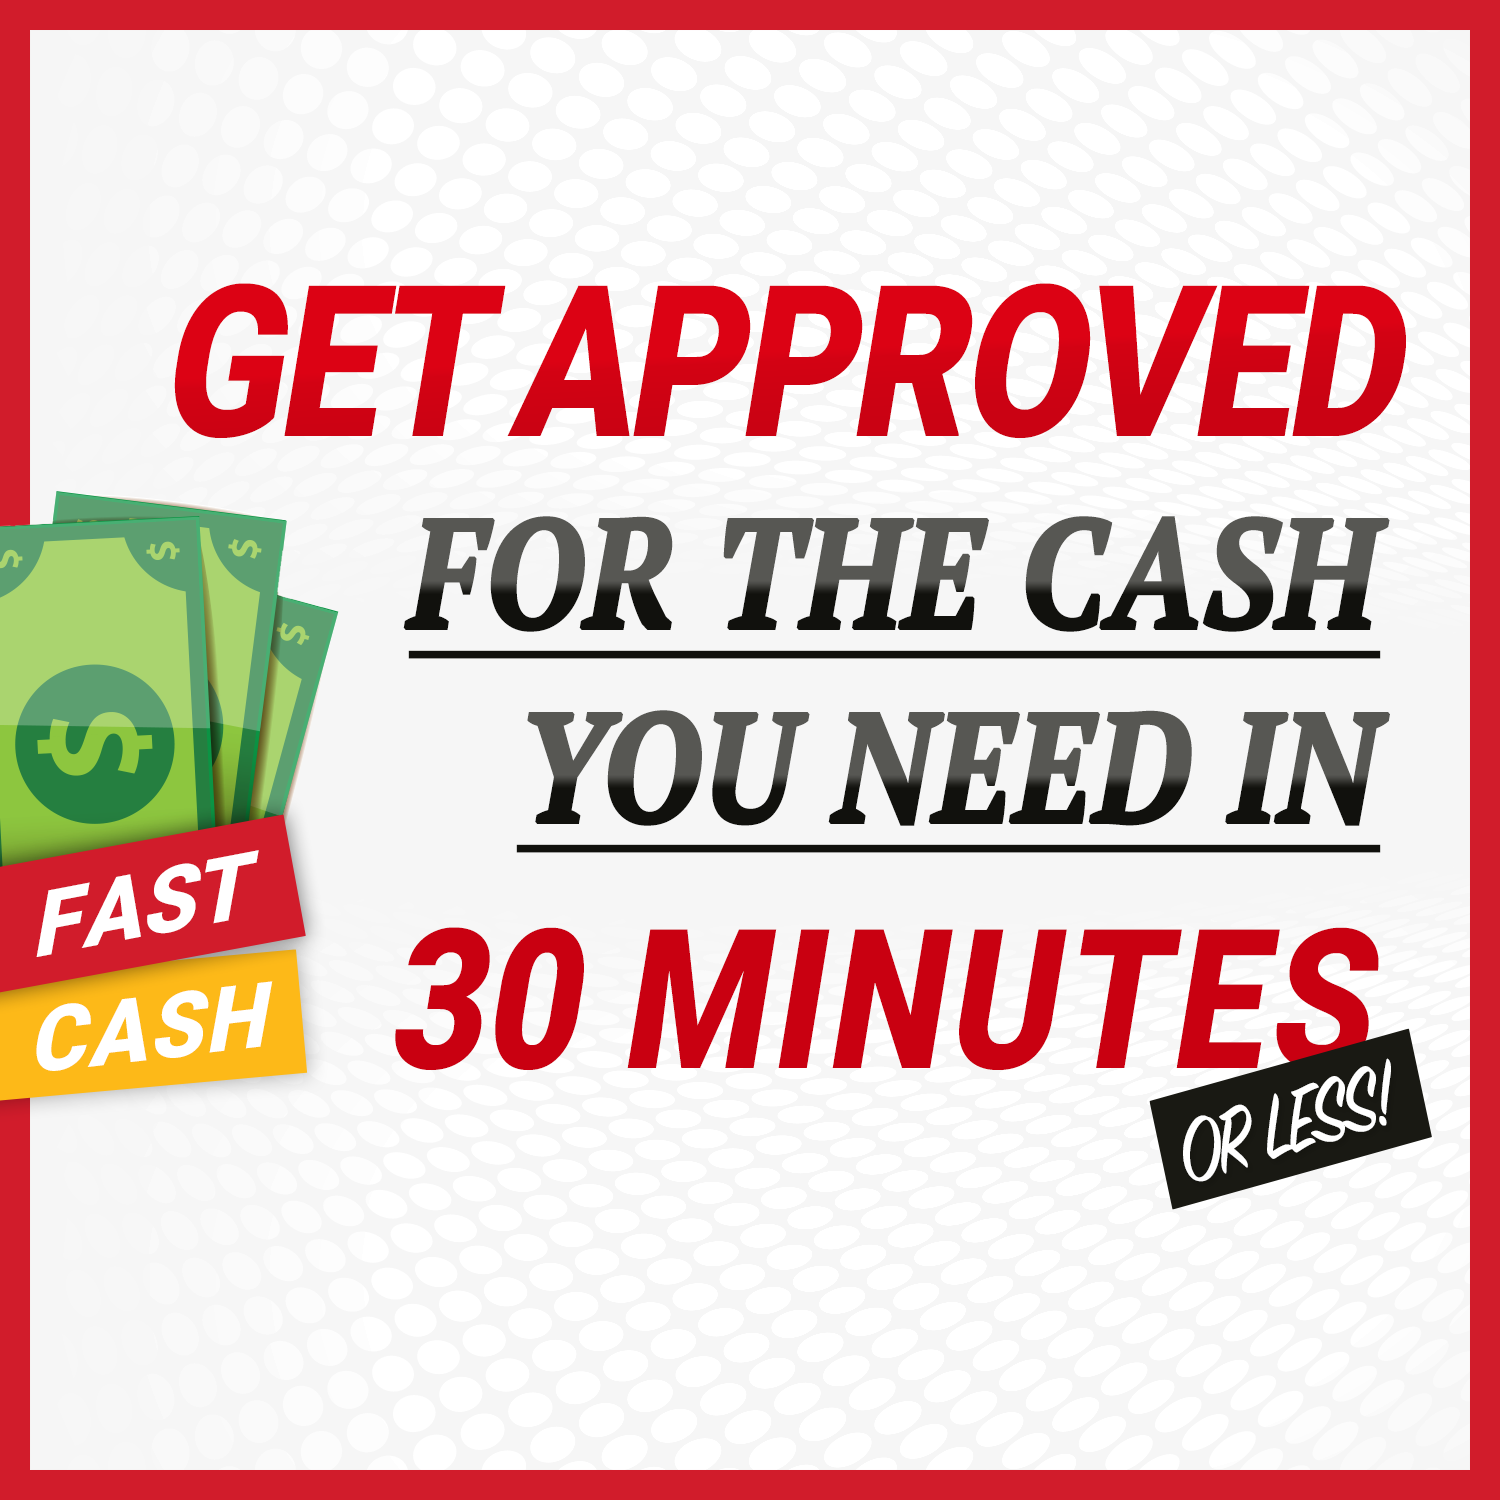 Texas Car Title and Payday Loan Services, Inc. 111 Early Blvd Suite B, Early Texas 76802